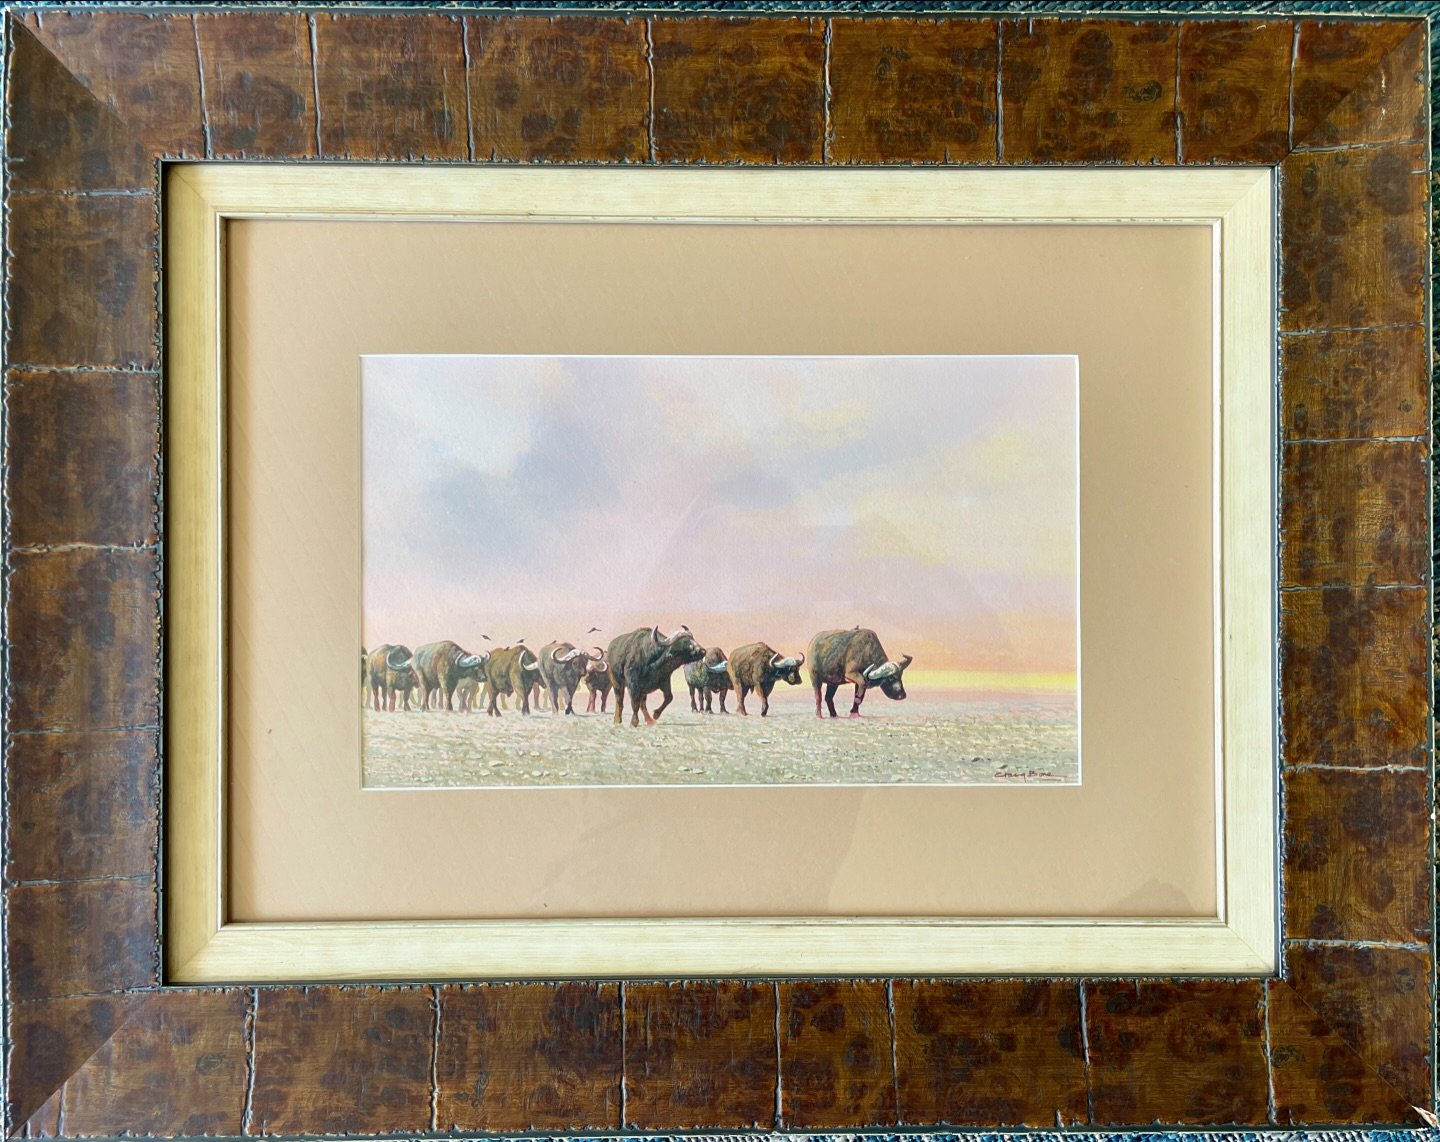 Soft pinks and yellows wash over the savanna as these gentle giants make their way back home. A touch of romance in the African wild. &ldquo;The Journey. #craigboneartist #watercolordreams #africanbuffalo #romanticmood